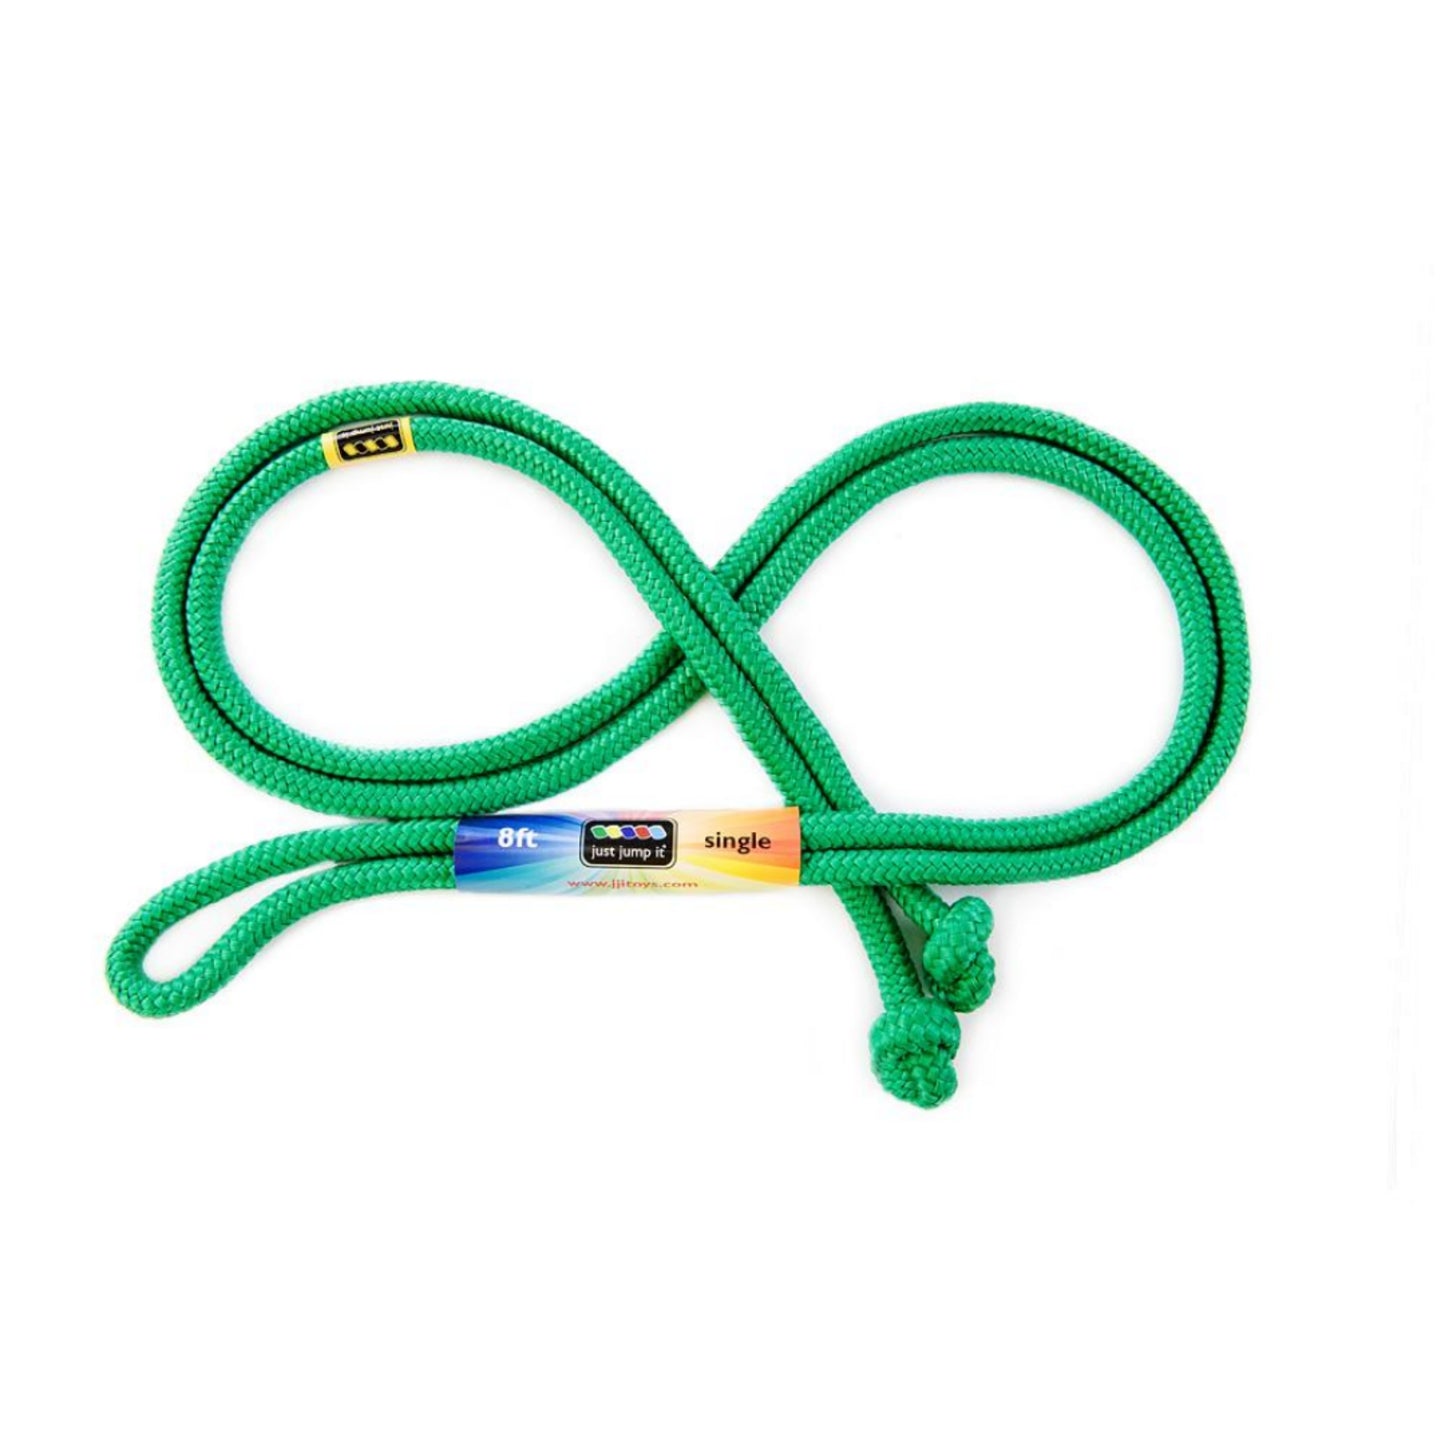 8' Rainbow Single Jump Rope - Lots of Color Choices